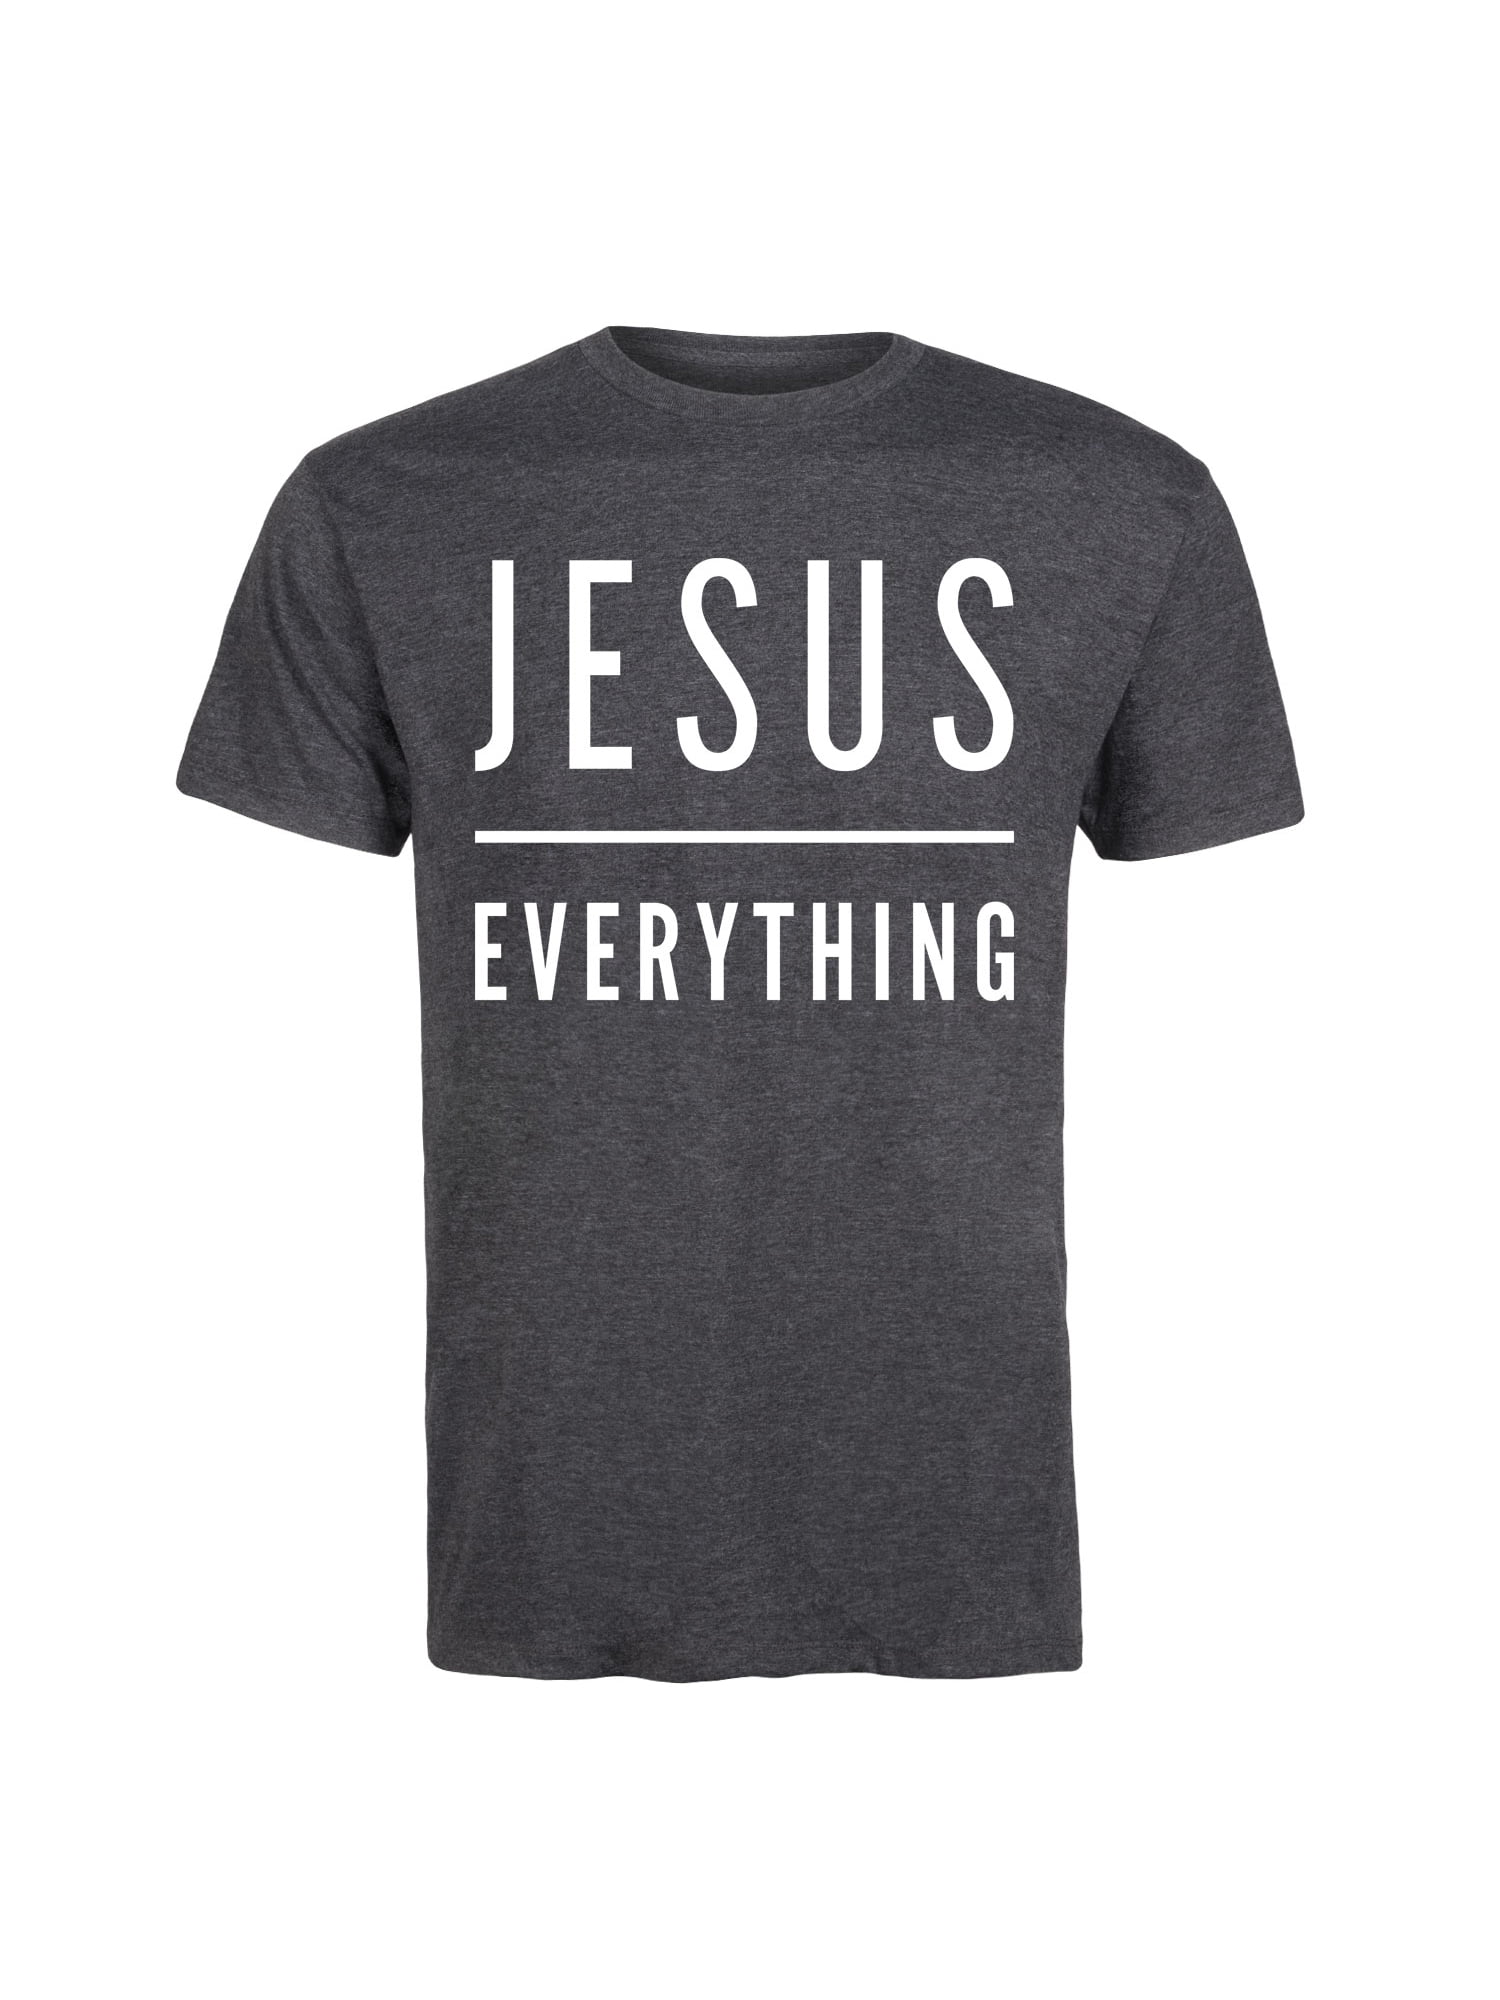 T-Shirt JESUS OVER EVERYTHING